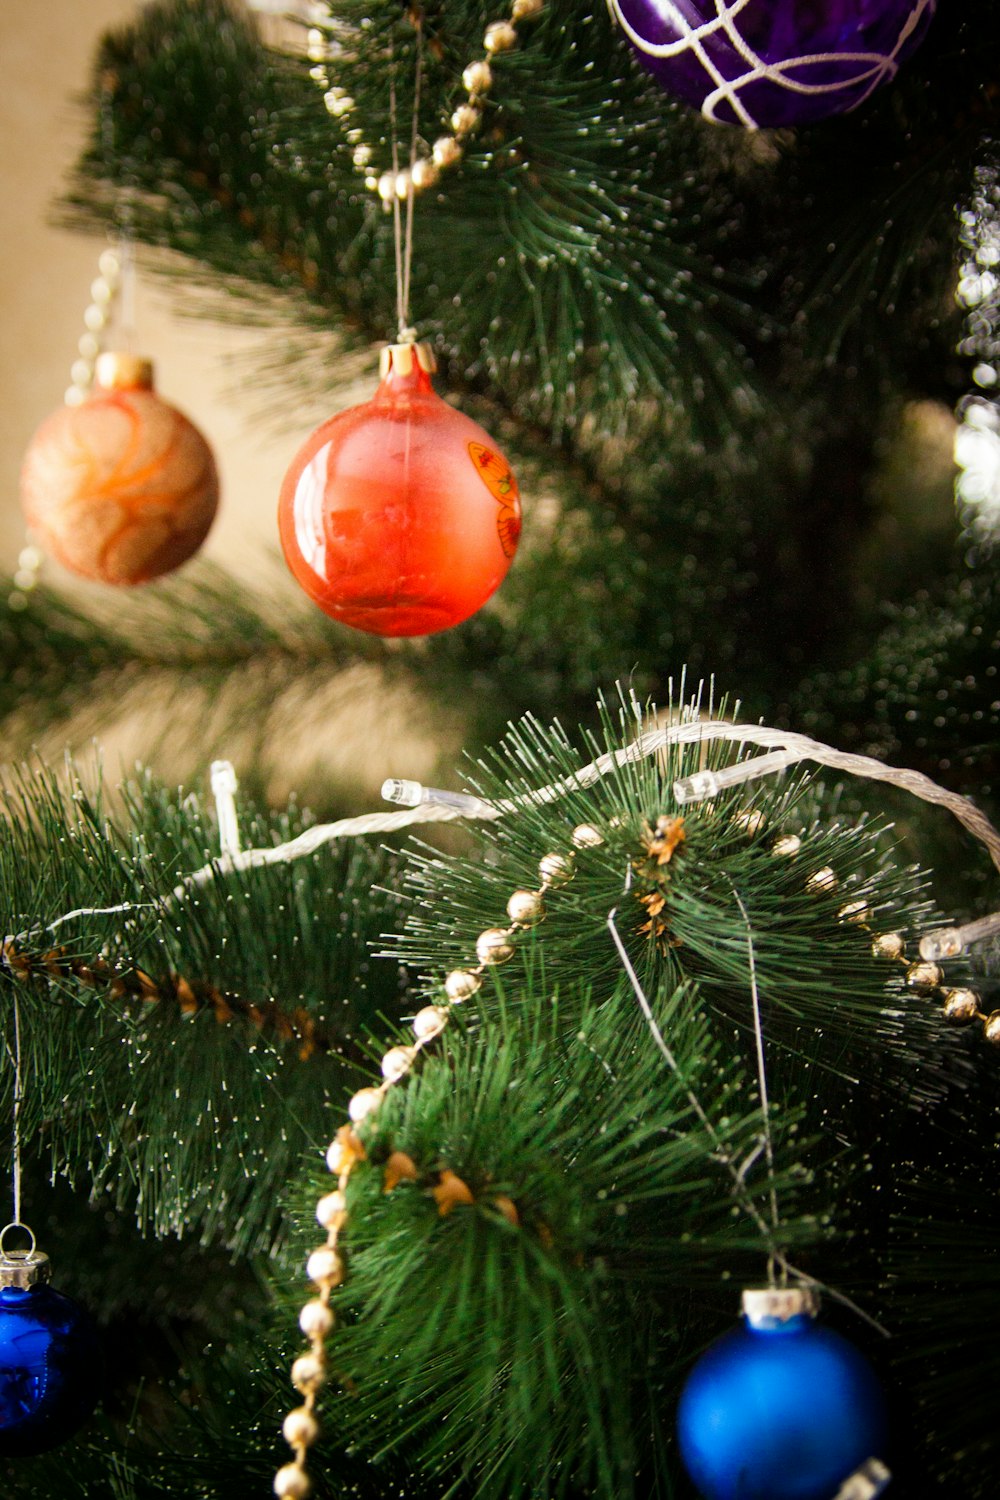 red bauble on green pine tree